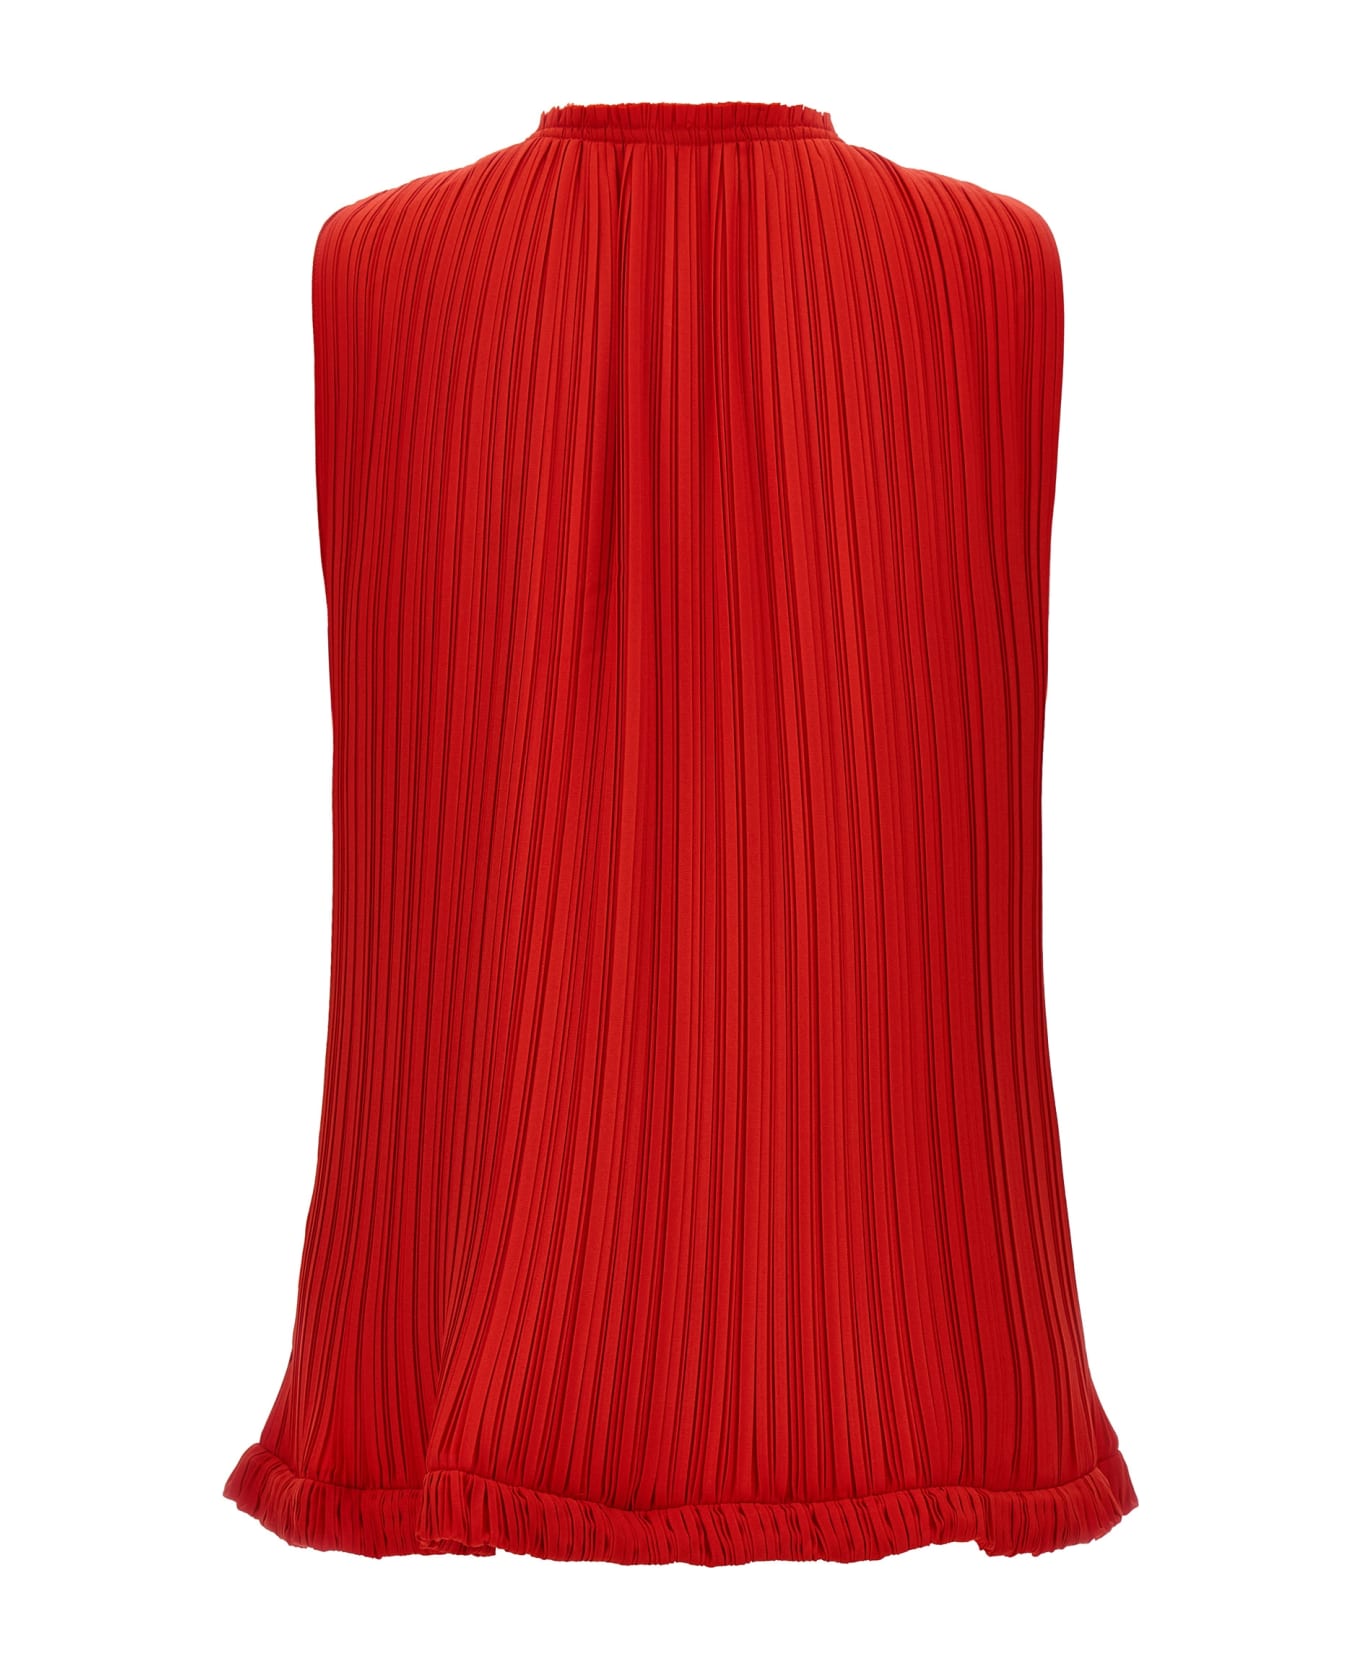 Lanvin Pleated Top - Red